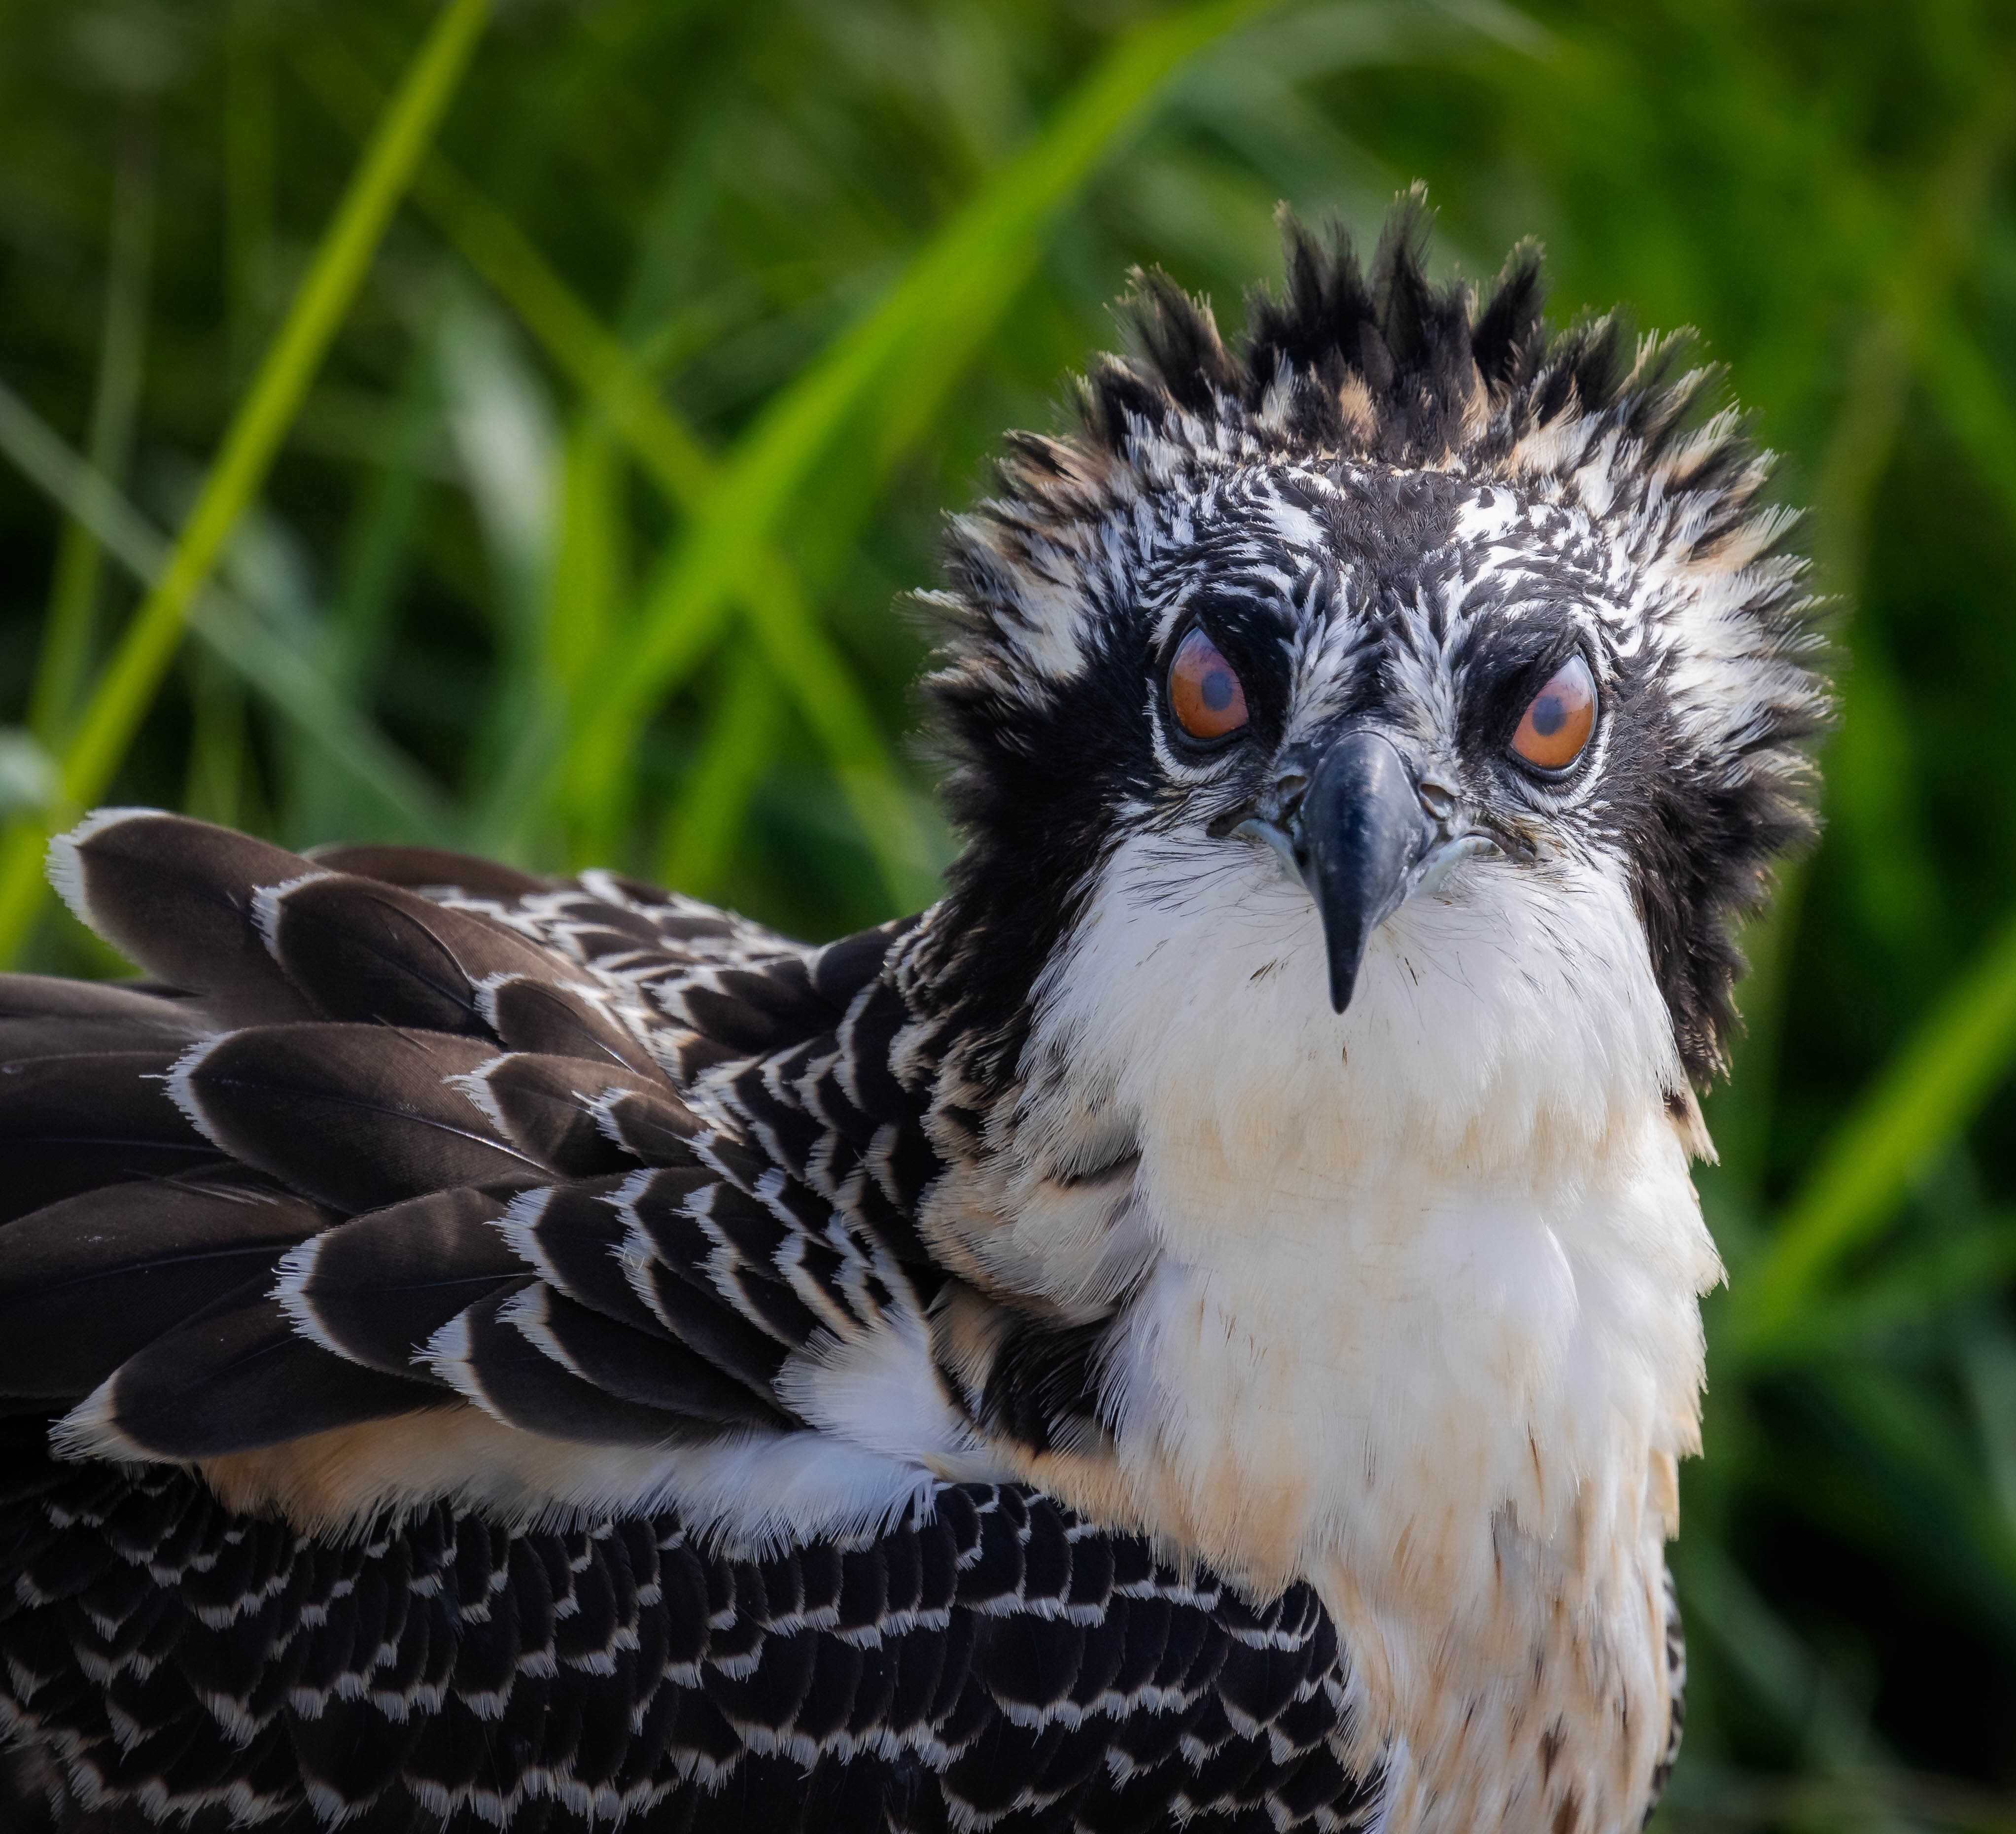 Several pairs of Ospreys now nest in the Alley Wetlands. Photo: <a href="https://www.flickr.com/photos/51819896@N04/" target="_blank">Lawrence Pugliares</a>